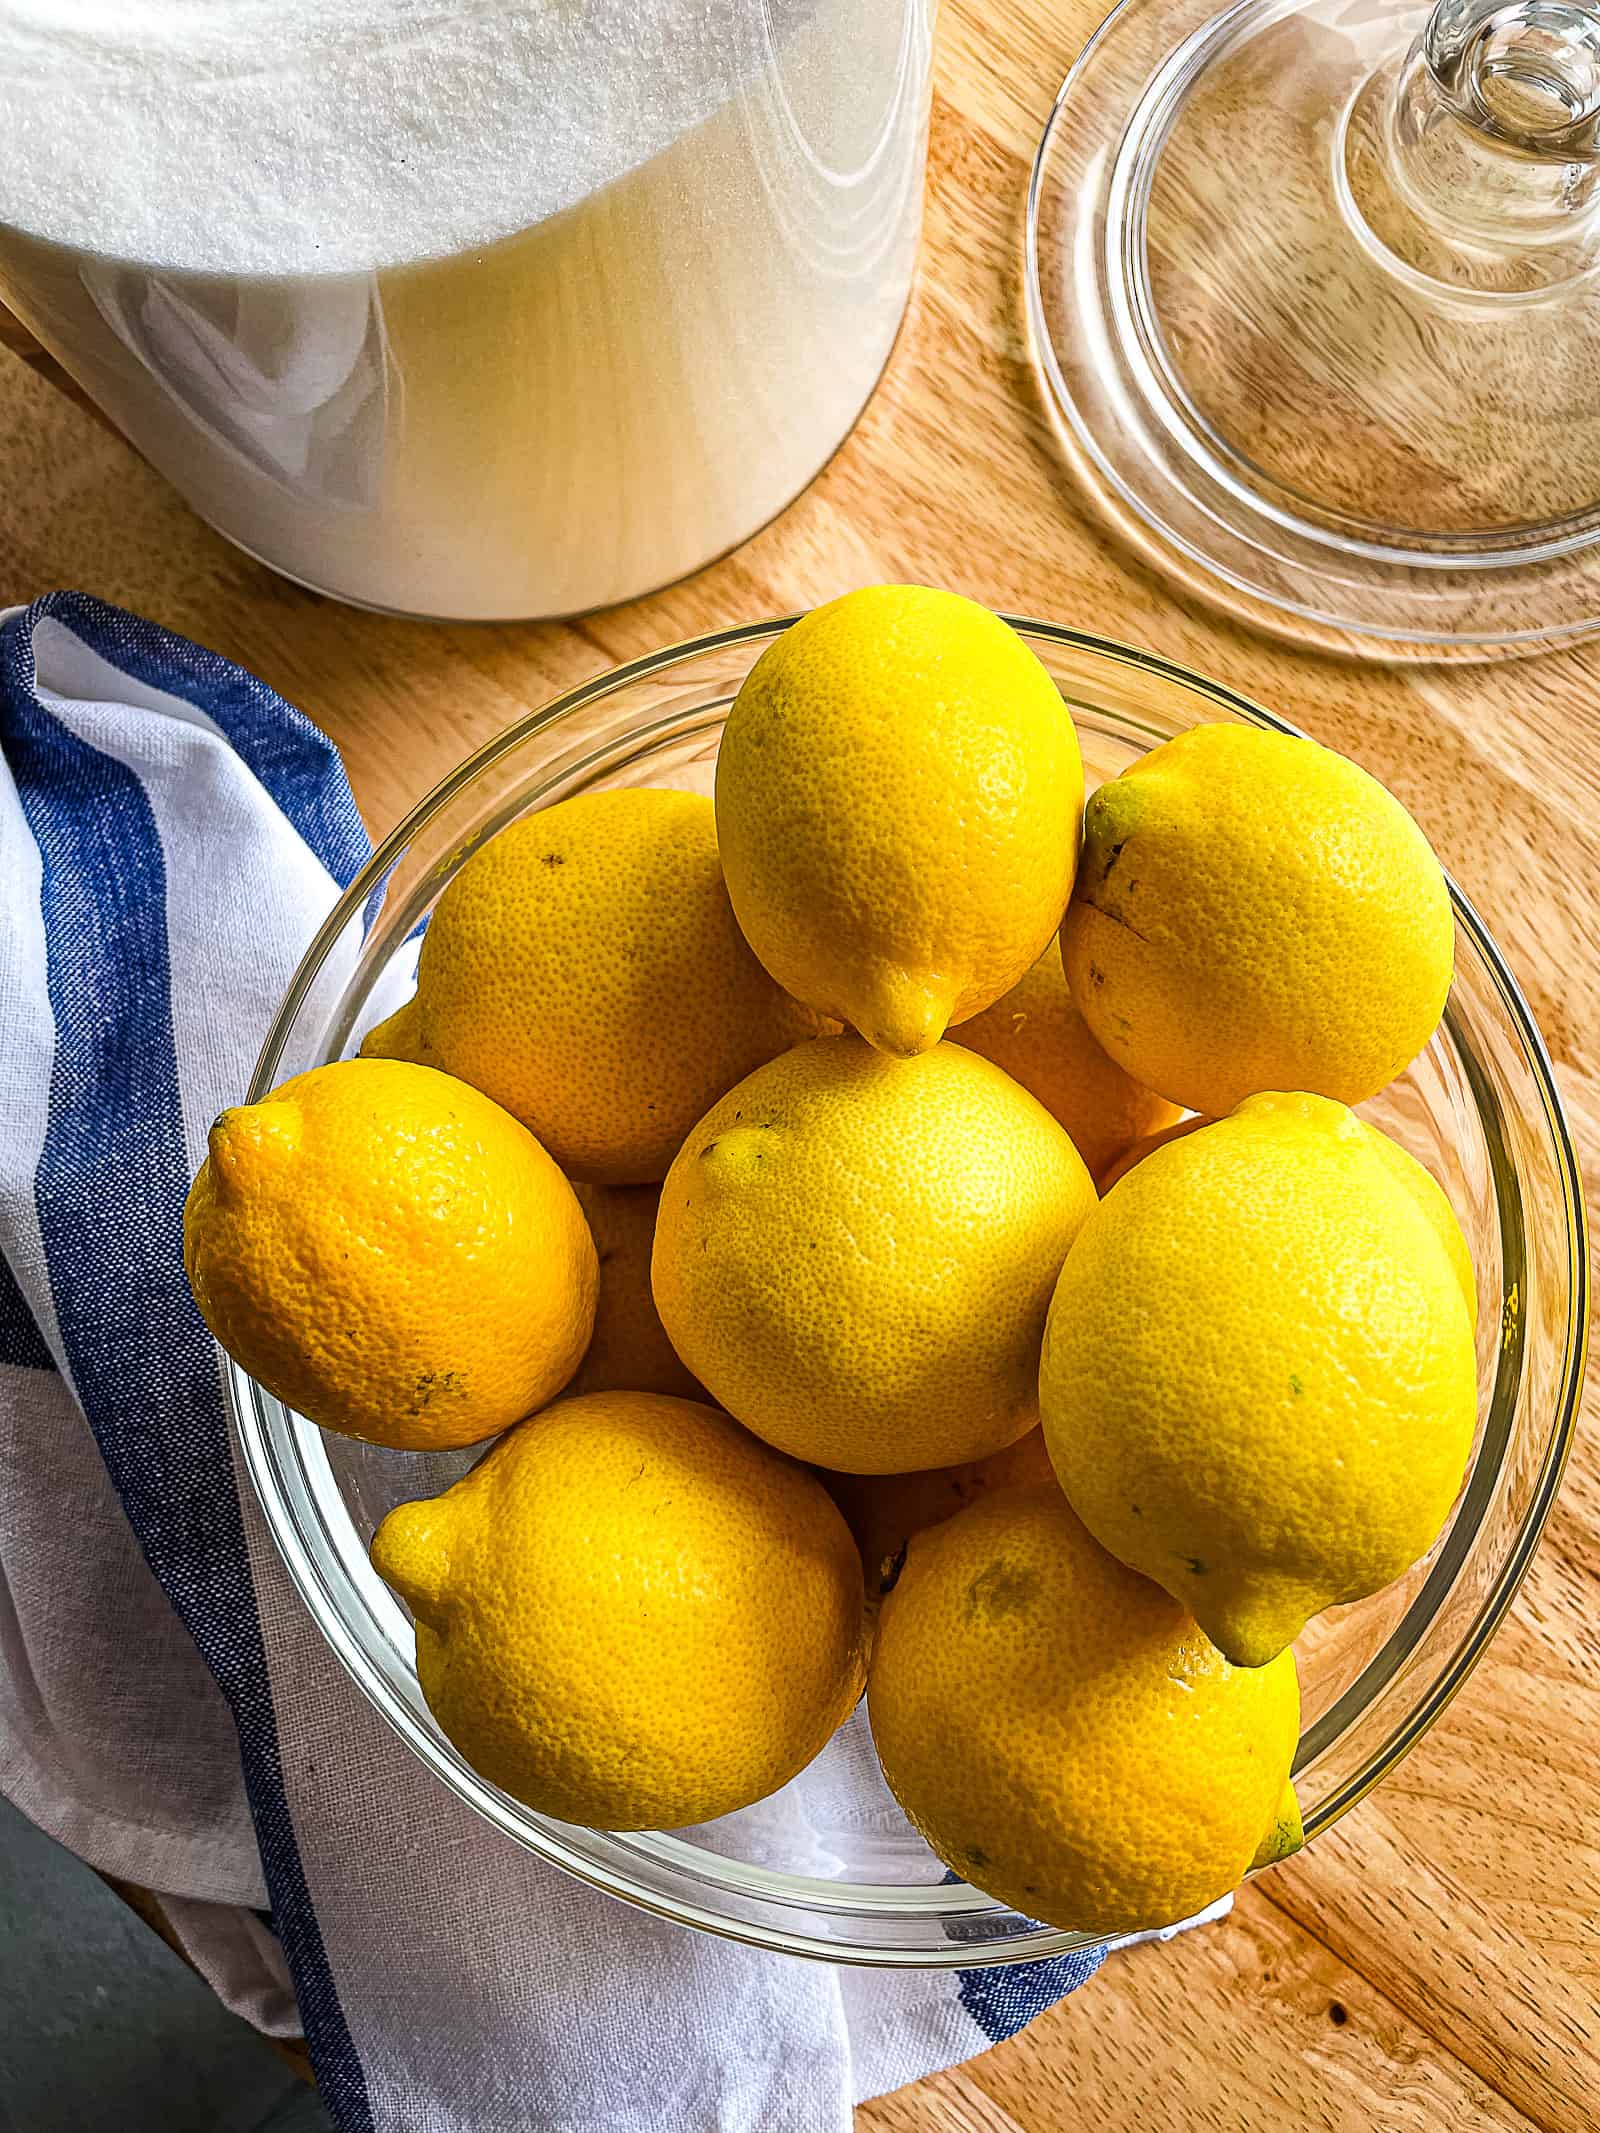 Bowl of lemons with a jar of sugar in the background.